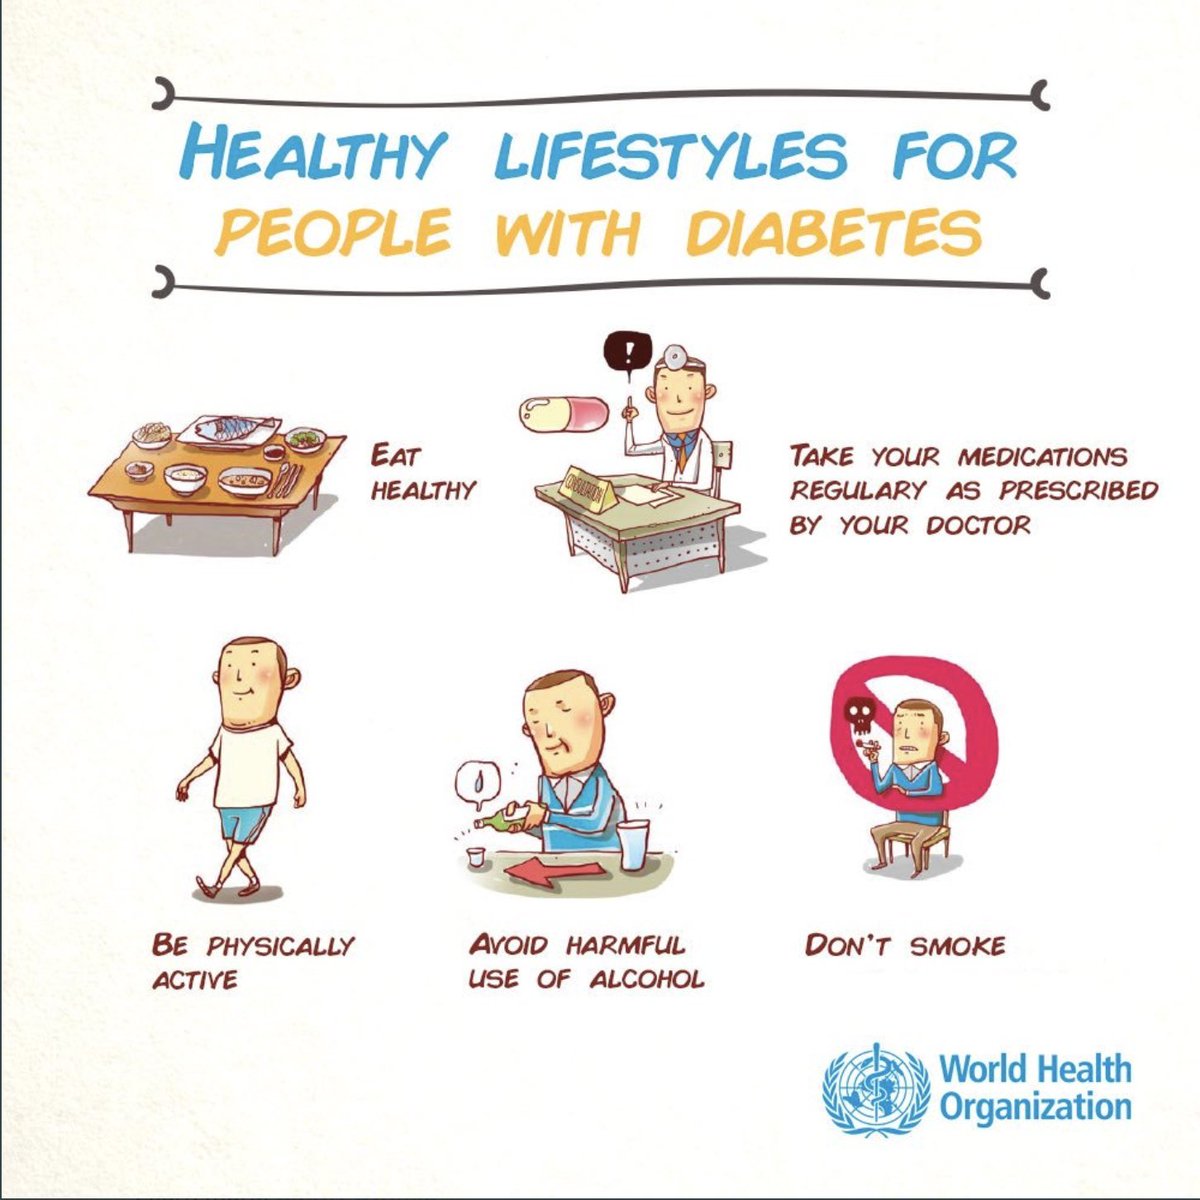 Treatment of  #diabetes involves diet and physical activity along with lowering of blood glucose and the levels of other known risk factors that damage blood vessels. Tobacco use cessation is also important to avoid complications.  http://bit.ly/2Kkqkmm   #WorldDiabetesDay